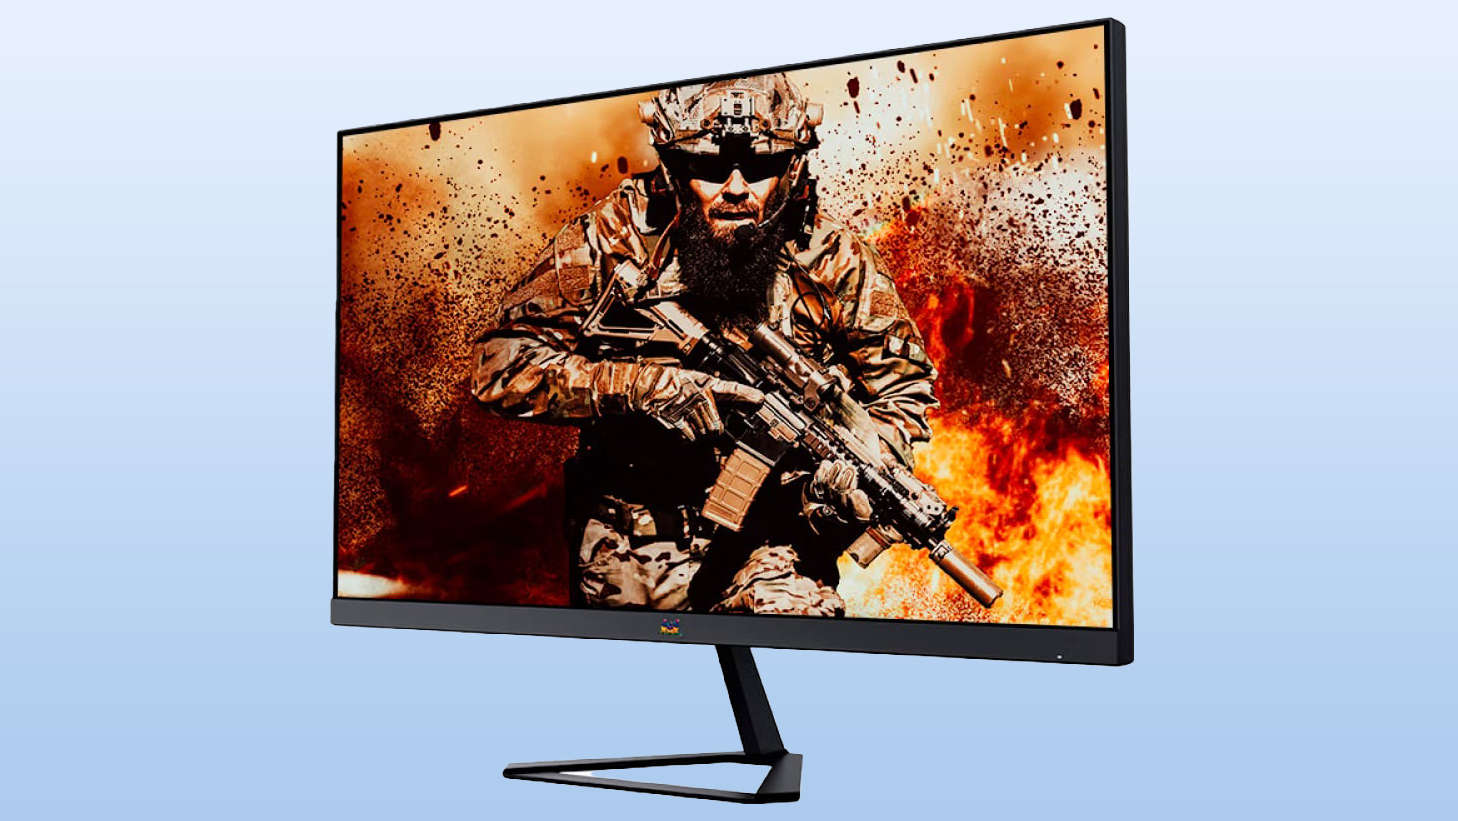 ViewSonic VX2758-4K-PRO-2 is their latest affordable 4K gaming monitor